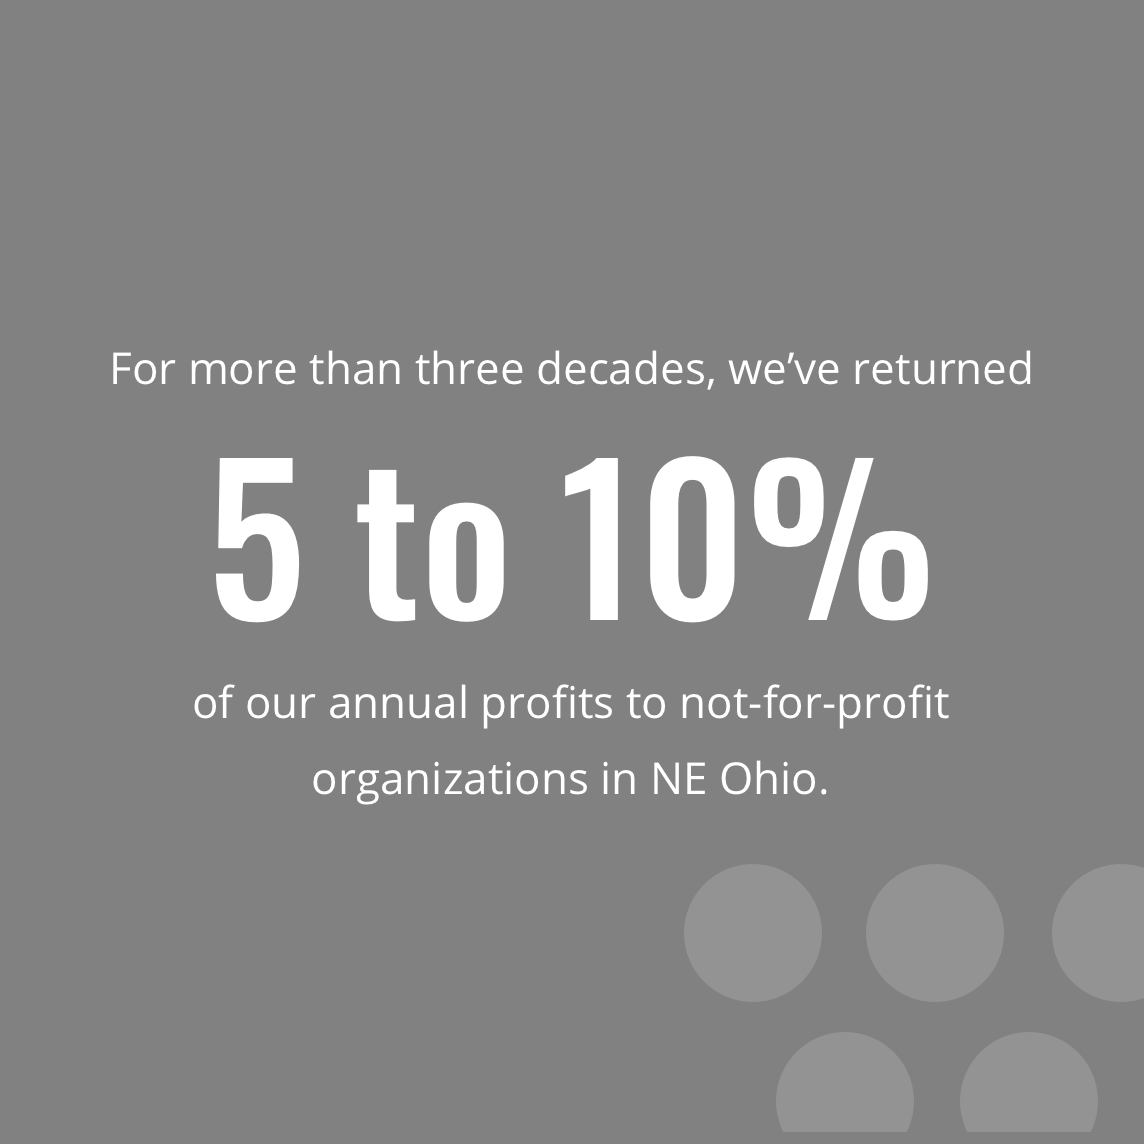 For more than three decades, we've returned five to ten percent of our annual profits back to not-for-profit organizations in NorthEast Ohio.